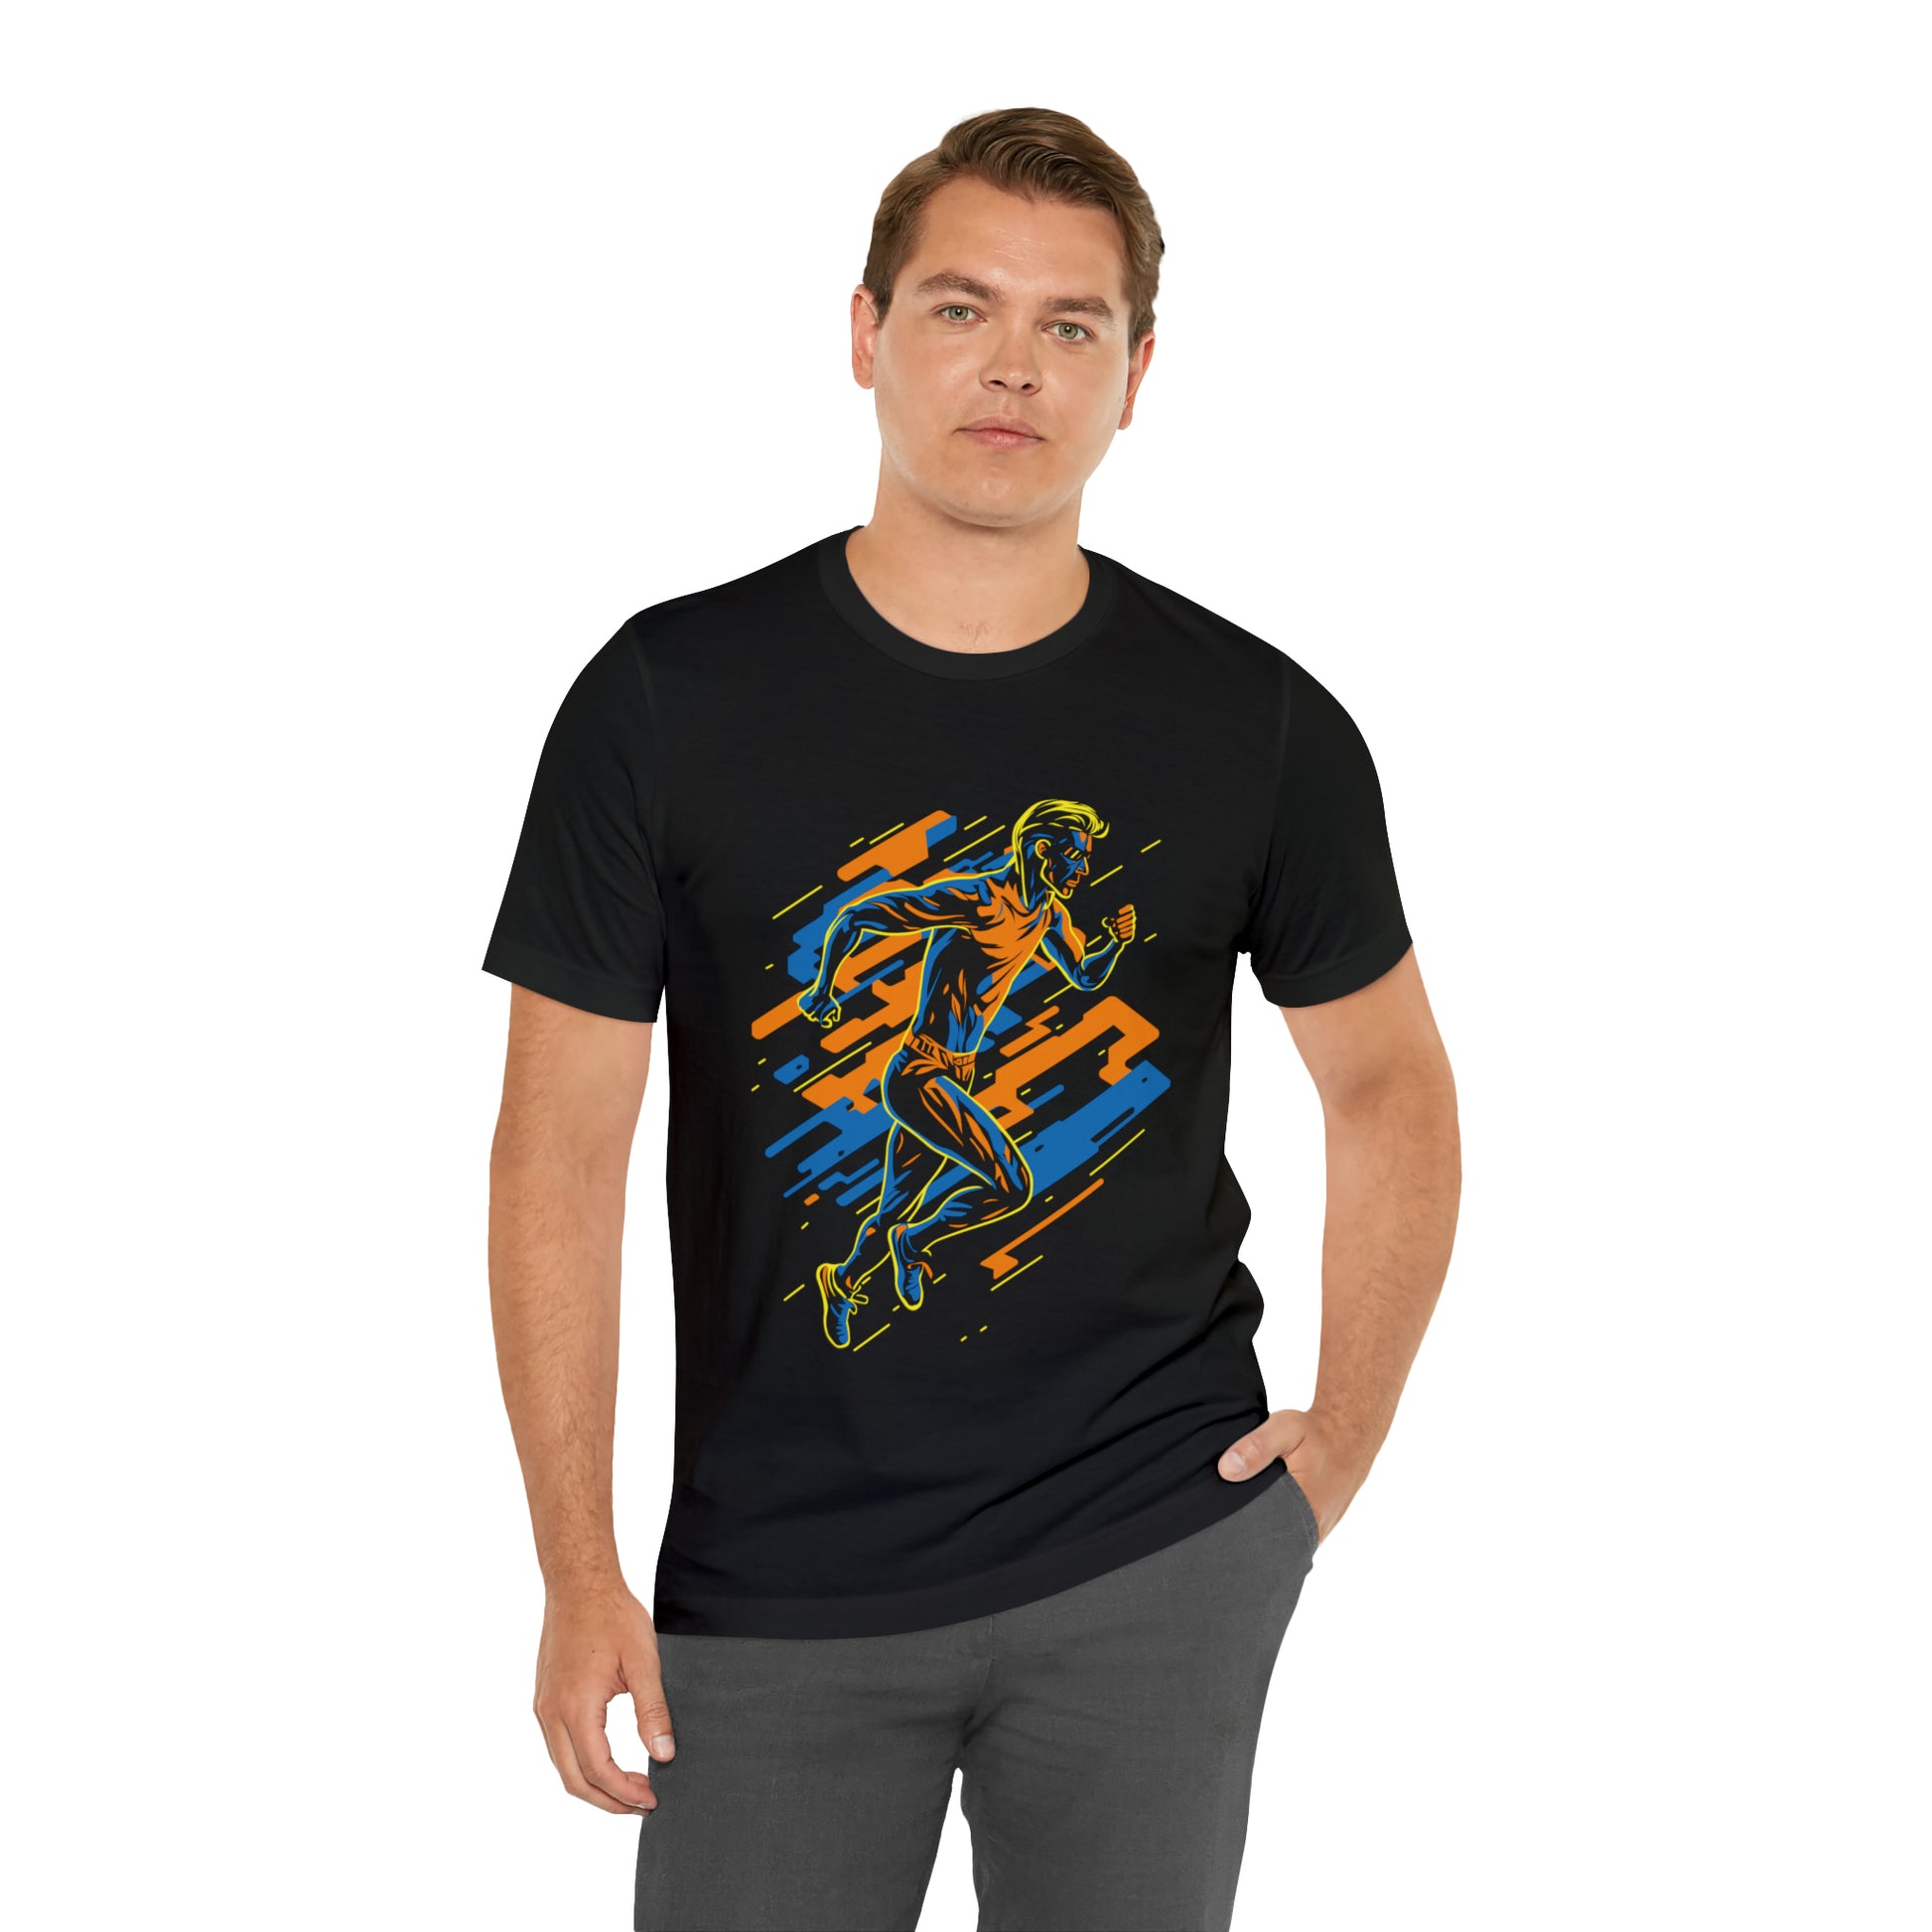 Black T-Shirt featuring a vibrant and dynamic runner design, capturing the energy of a 'Running Man'. Taken from the TEQNEON Radioactive collection